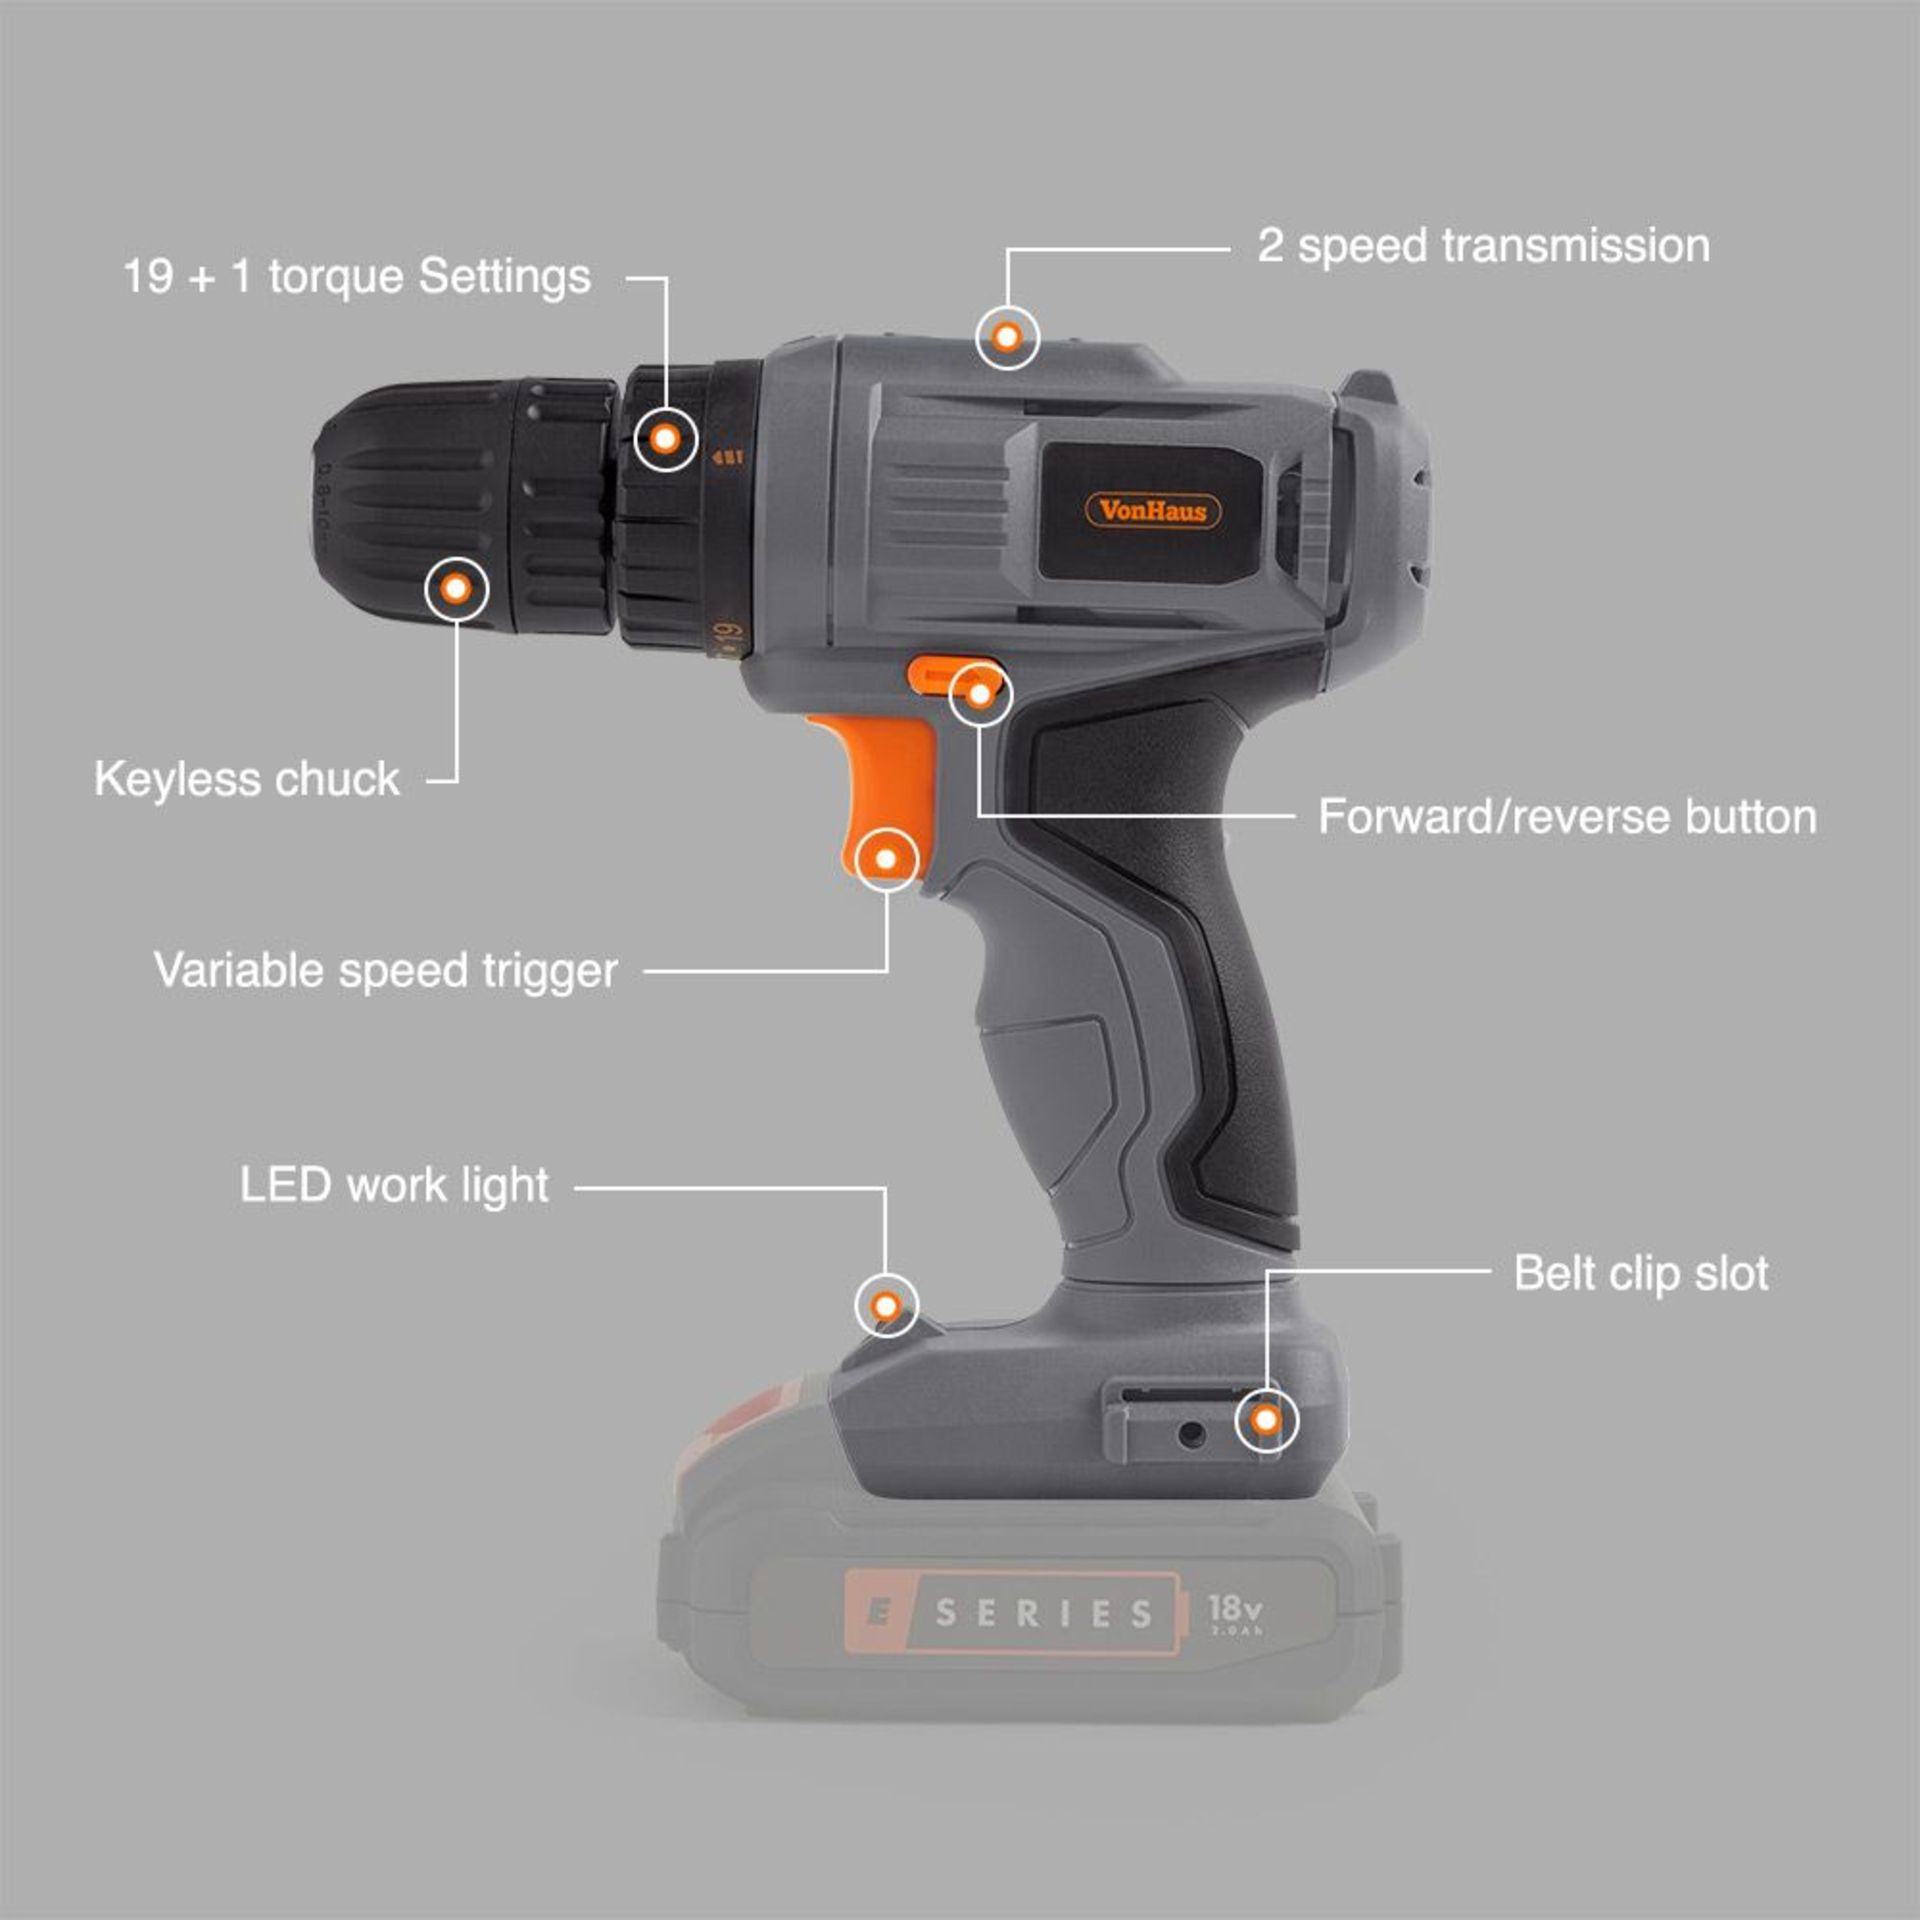 (K18) E-Series 18V Cordless Drill Driver Drill up to 10mm (metal) & 20mm (wood) 30NM torque... - Image 2 of 3